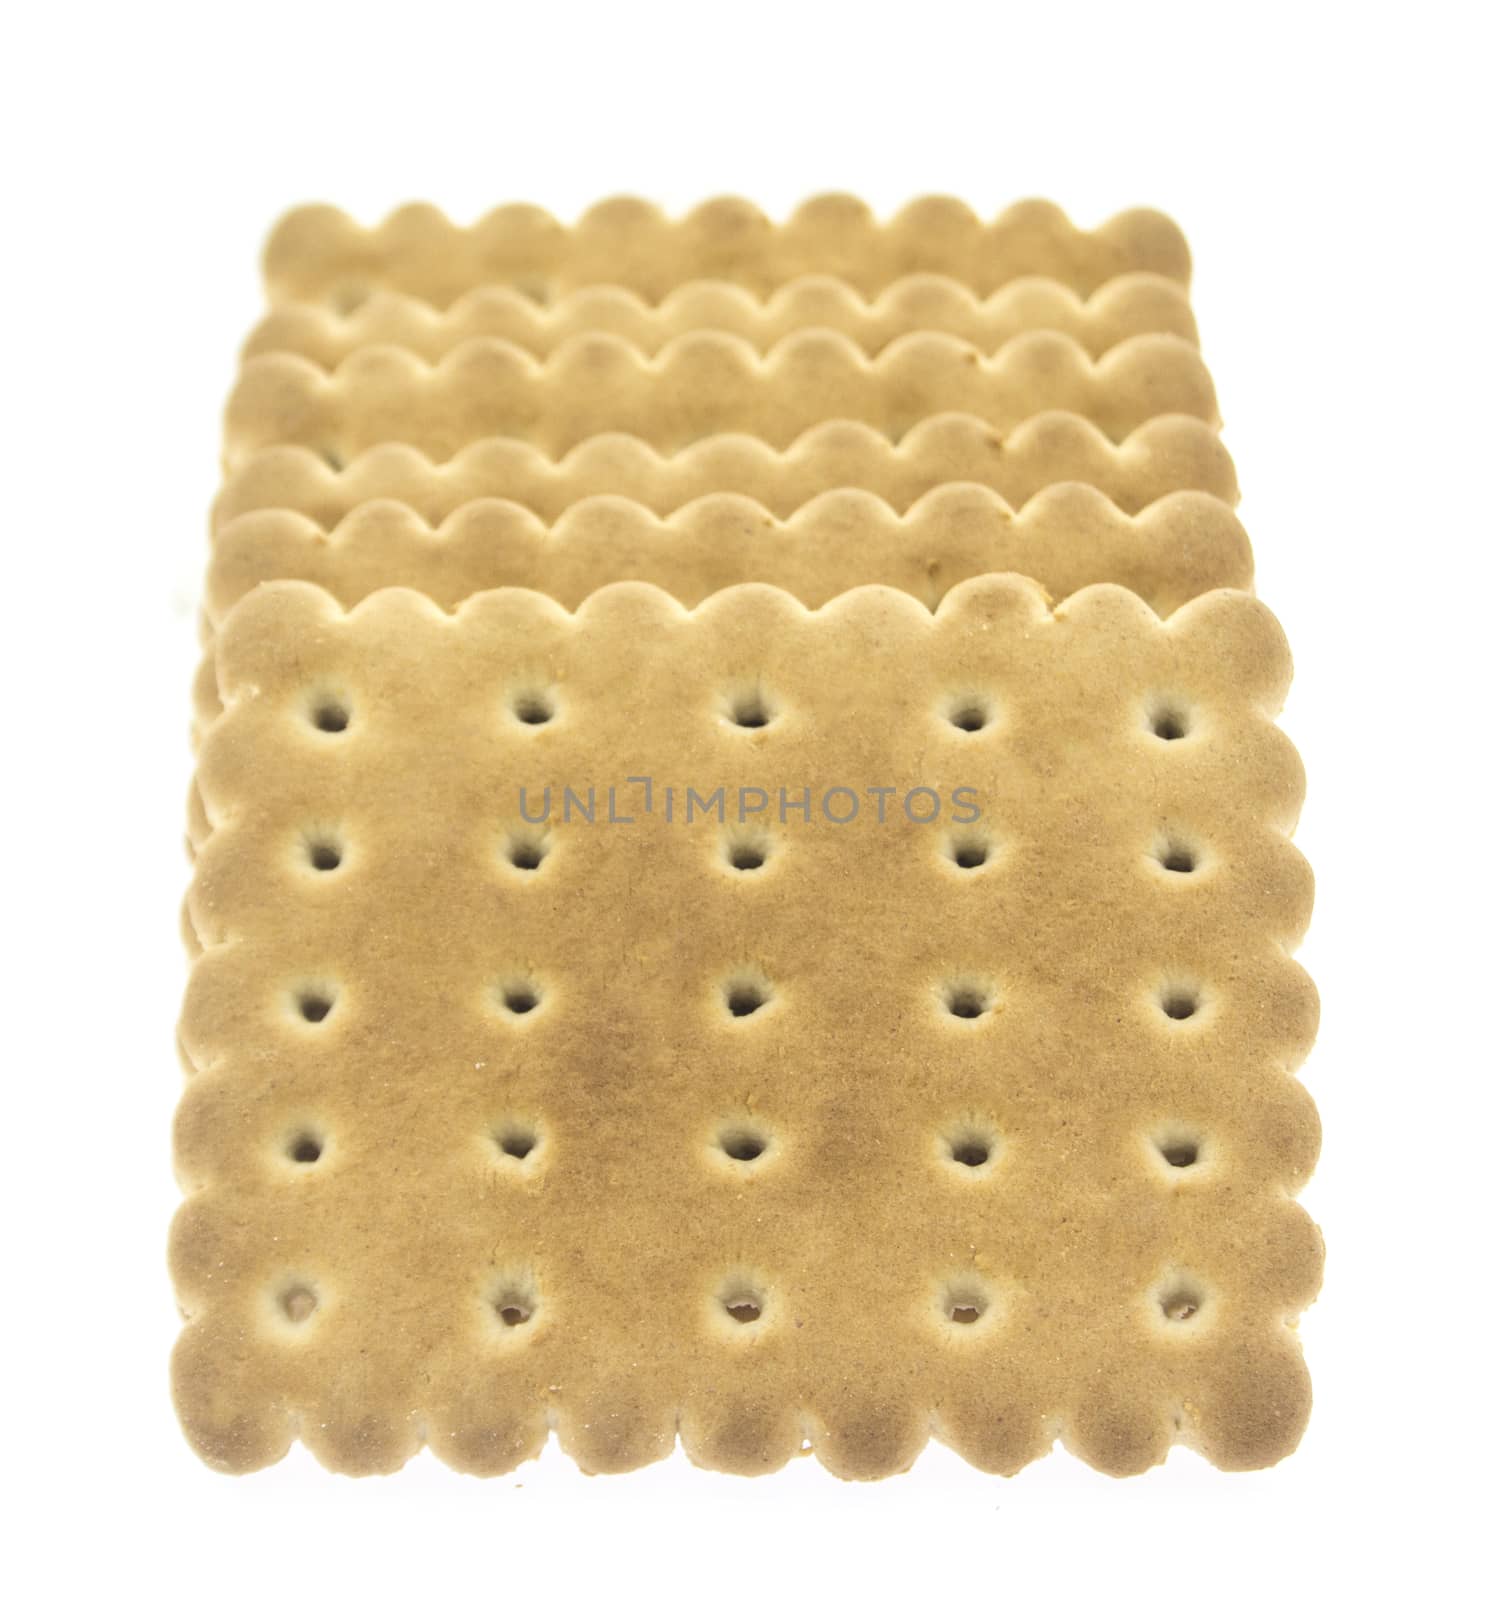 Bakery - Biscuit puzzle / Sweet food - Bakery Isolated on white